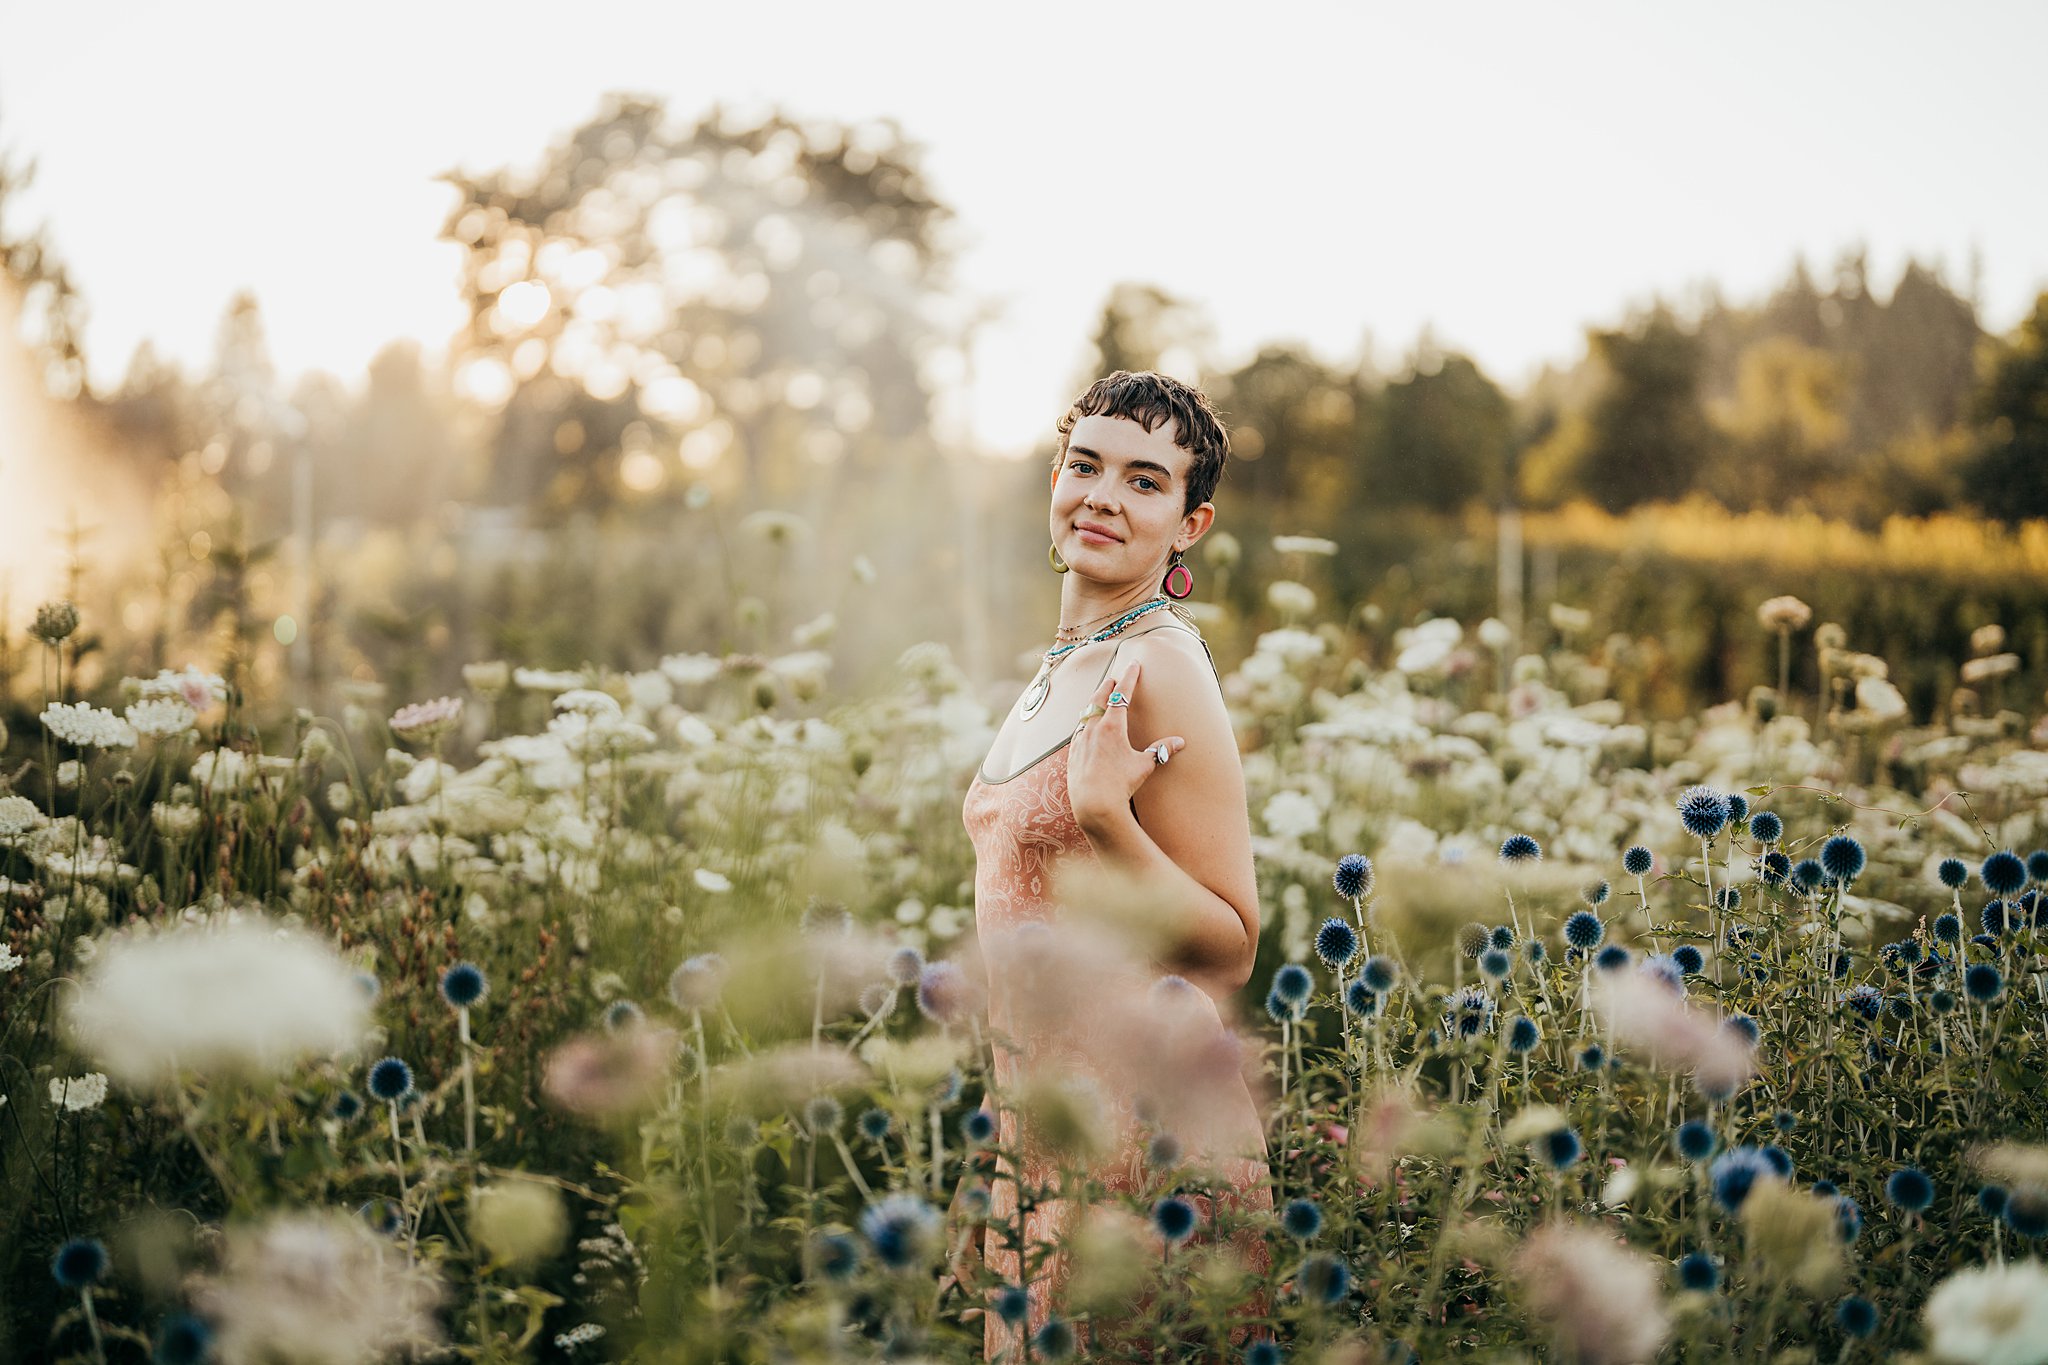 A woman in a red dress stands among white and blue flowers at sunset in a garden Seattle Photoshoot Locations